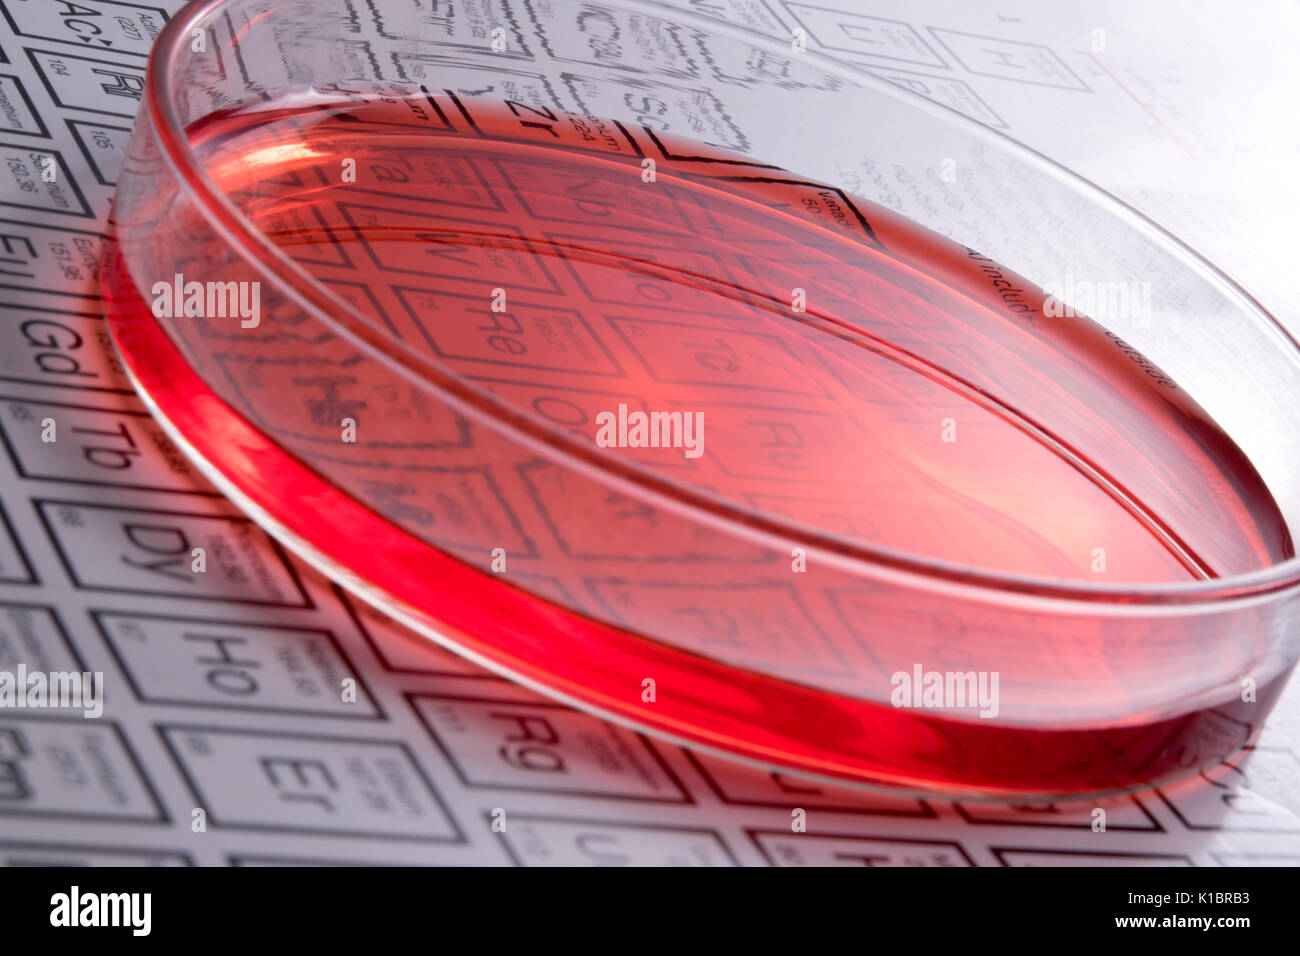 Chemical concepts Stock Photo